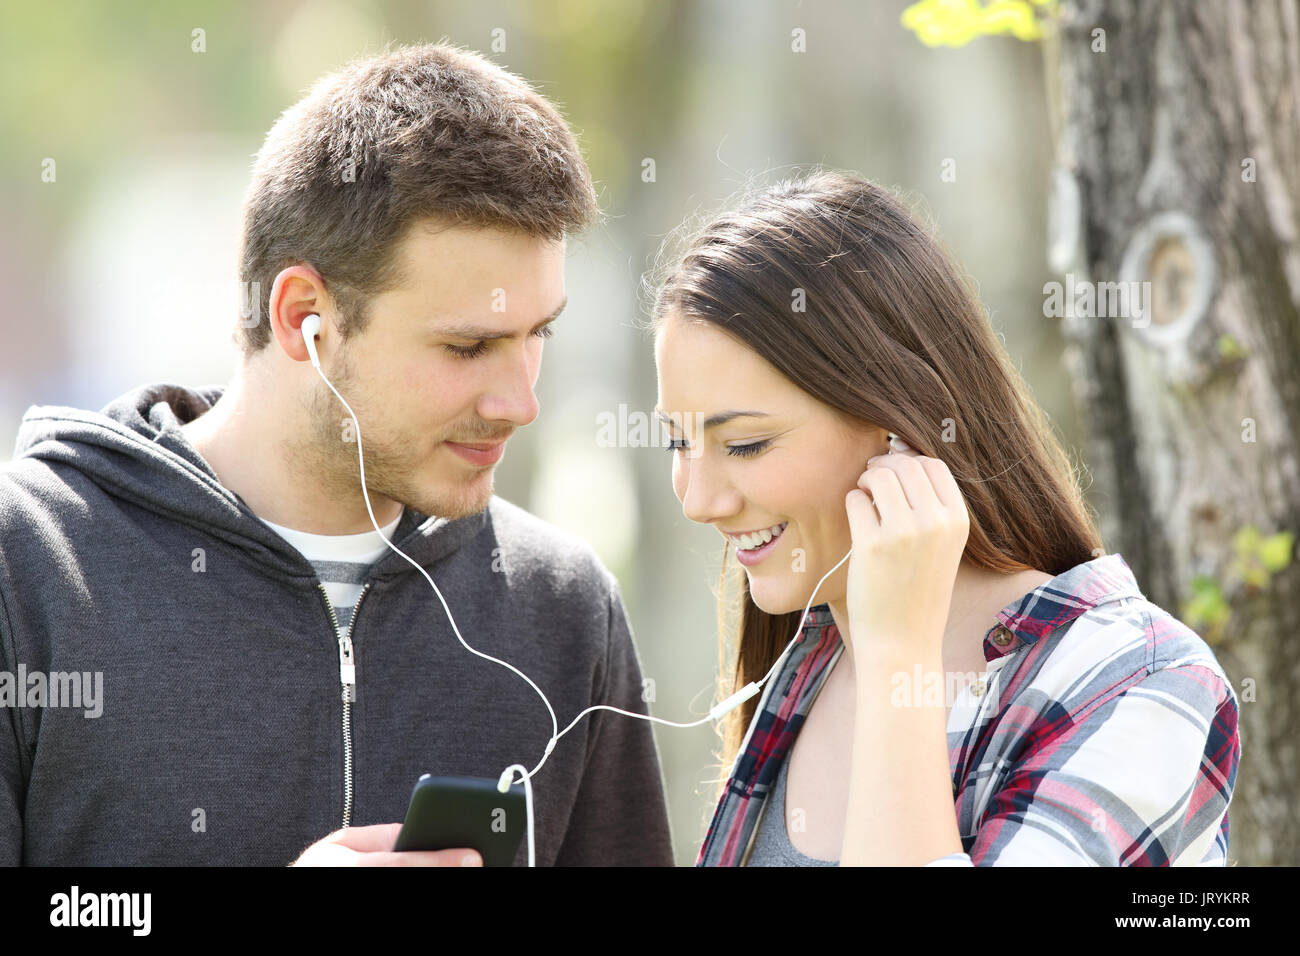 Couple flirting and sharing music on line with earphones and a smart phone outdoors in a park Stock Photo